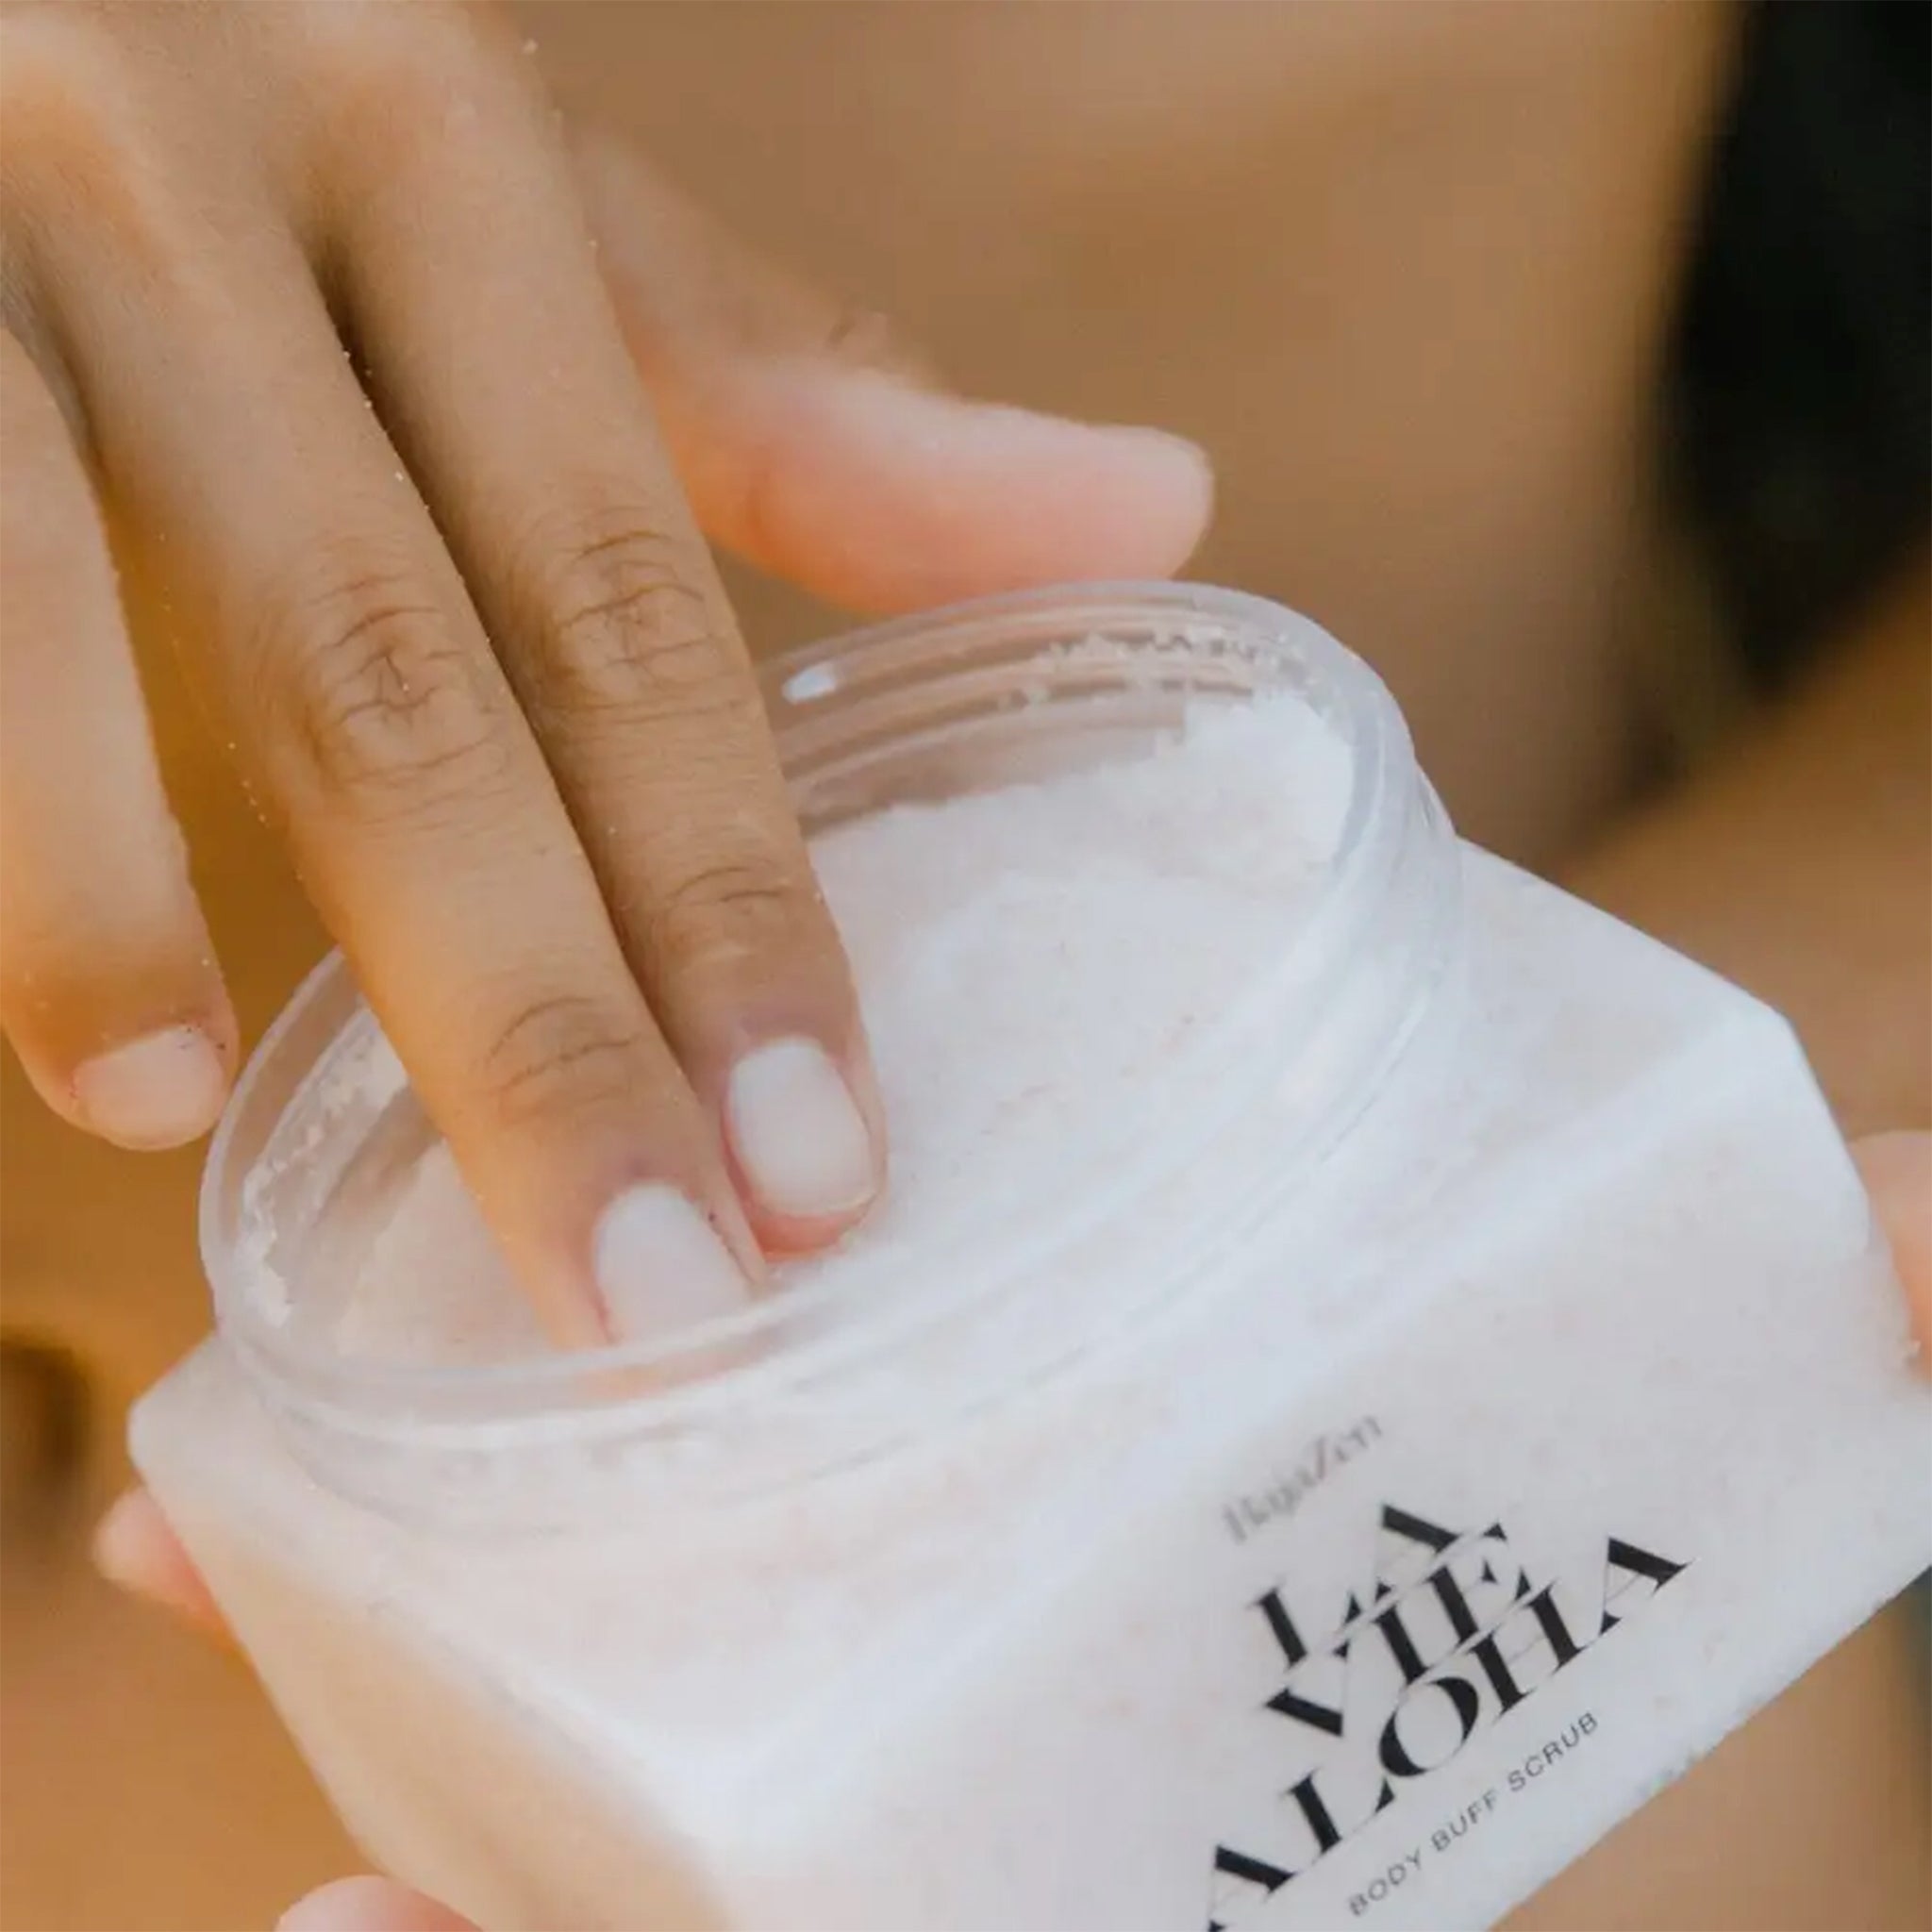 A clear container with a neutral body scrub inside, white lid and black text that reads, "La Vie Aloha".